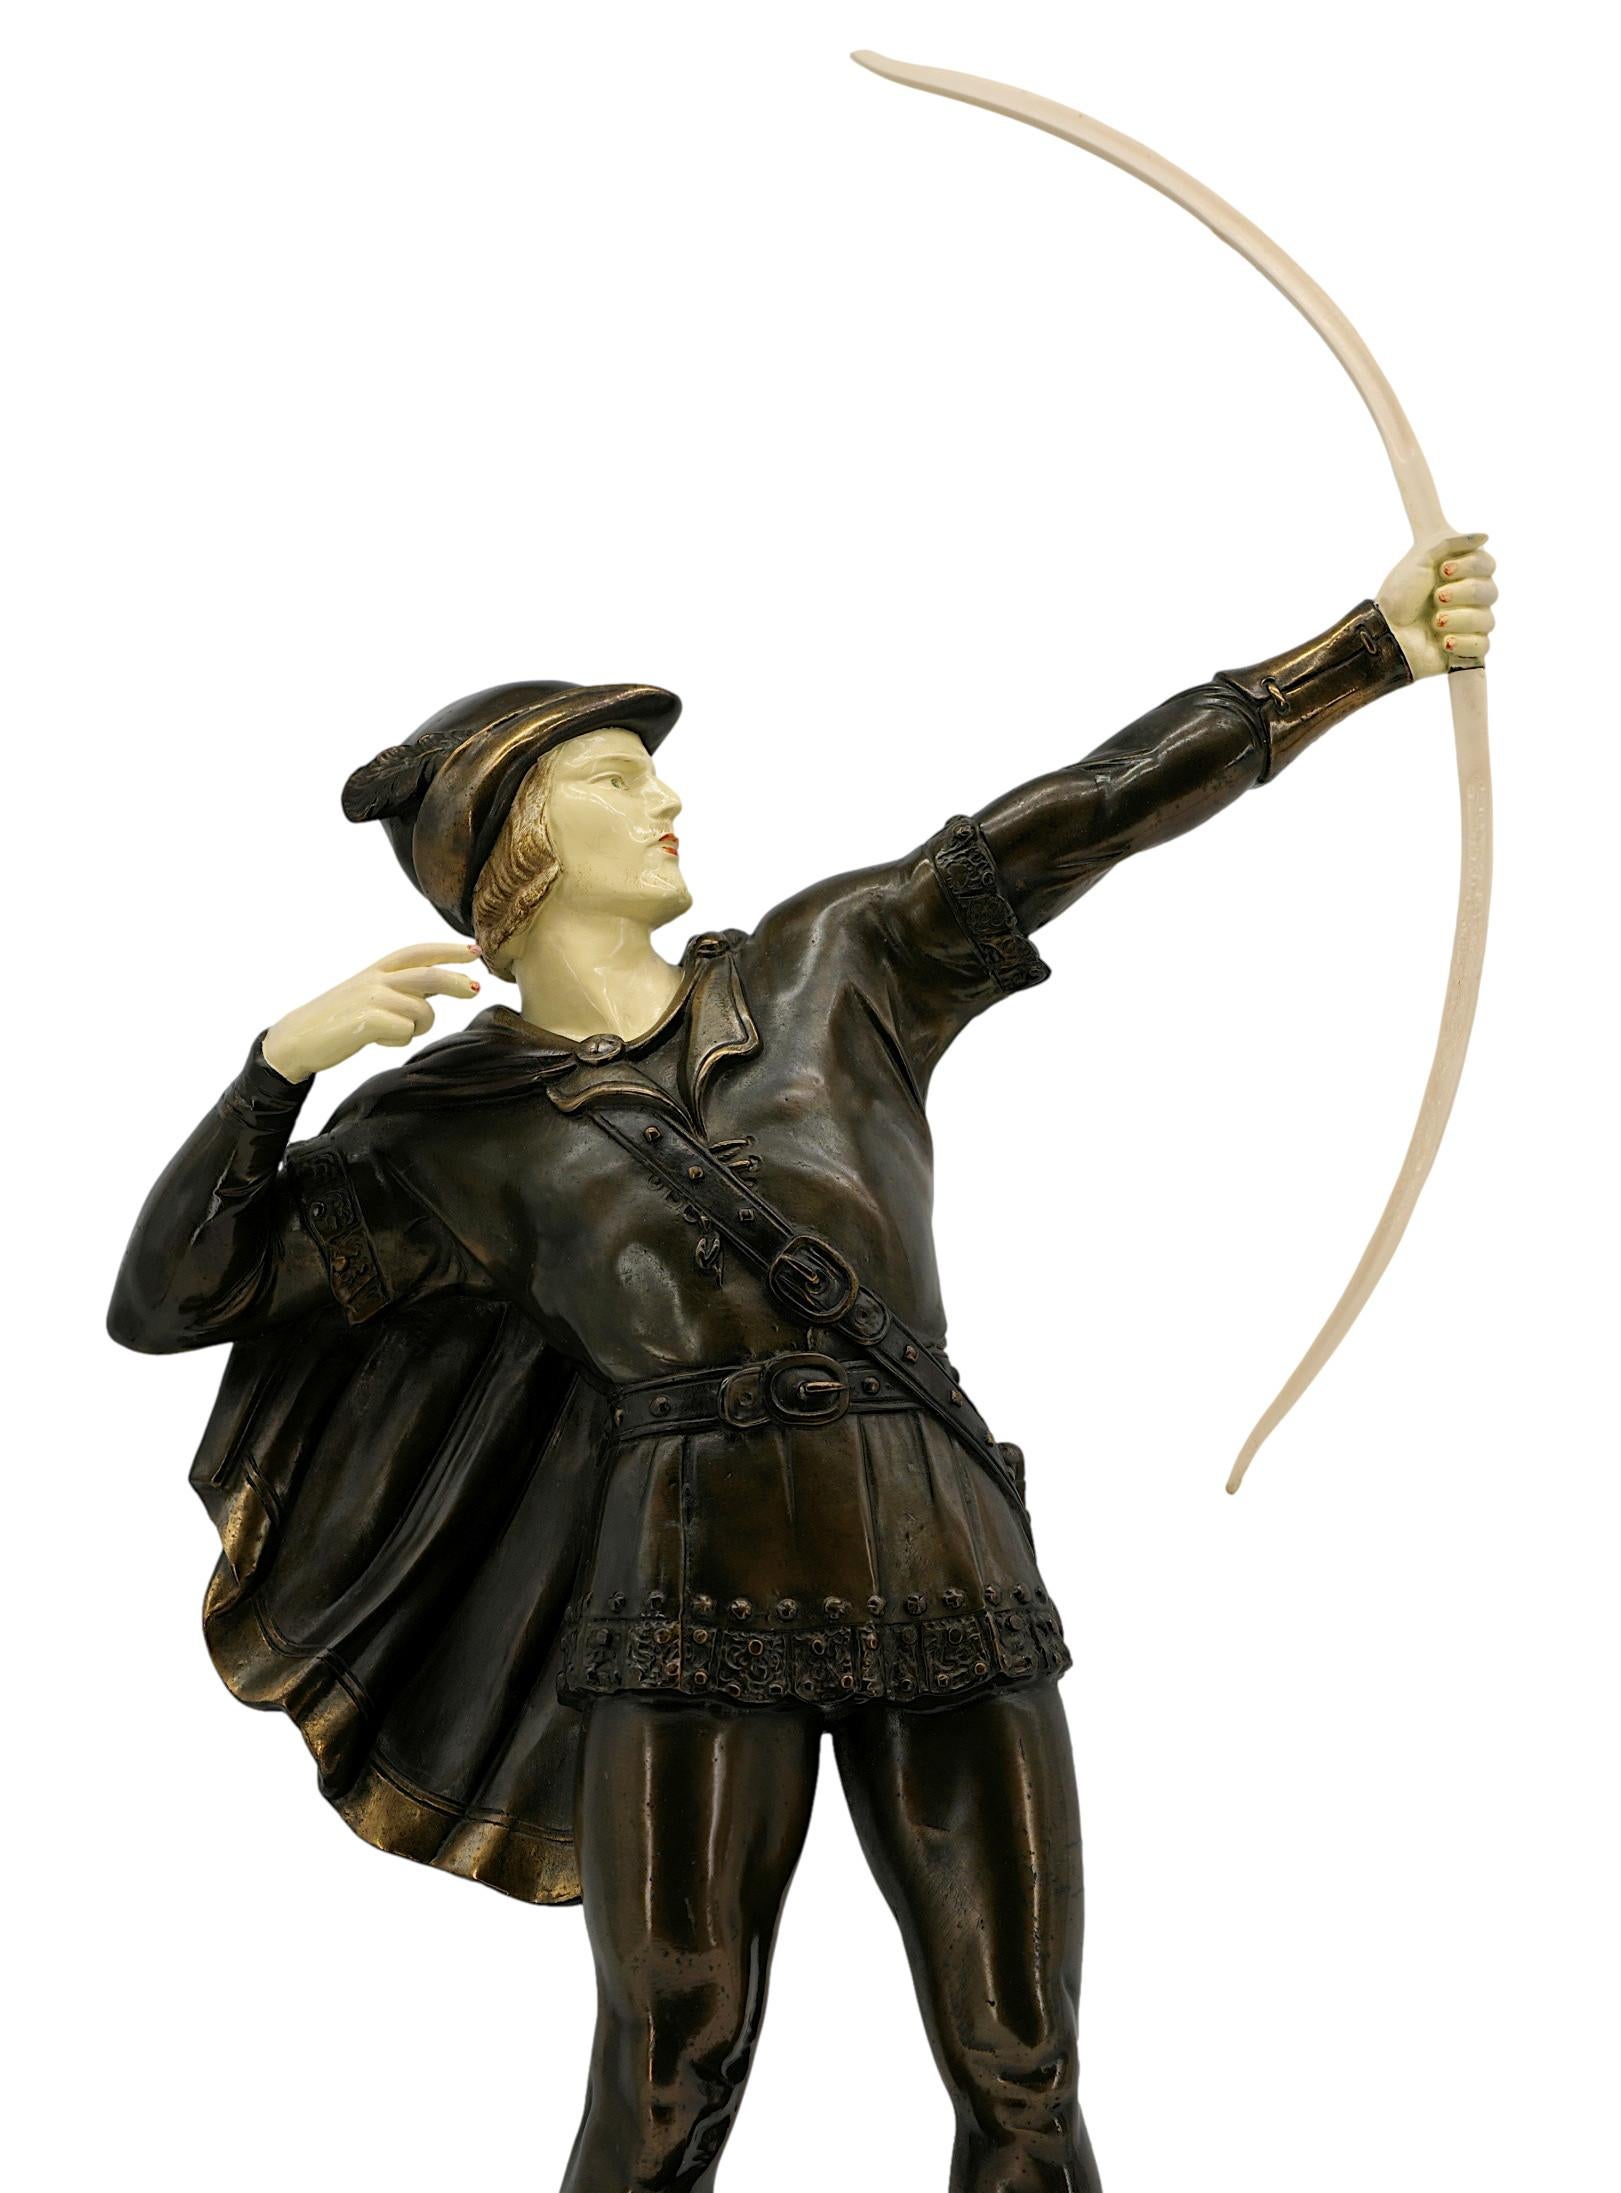 French Art Deco sculpture by J.d'Arsenes, France, 1930s. Robin Hood.  Spelter, bakelite and marble. Height : 26